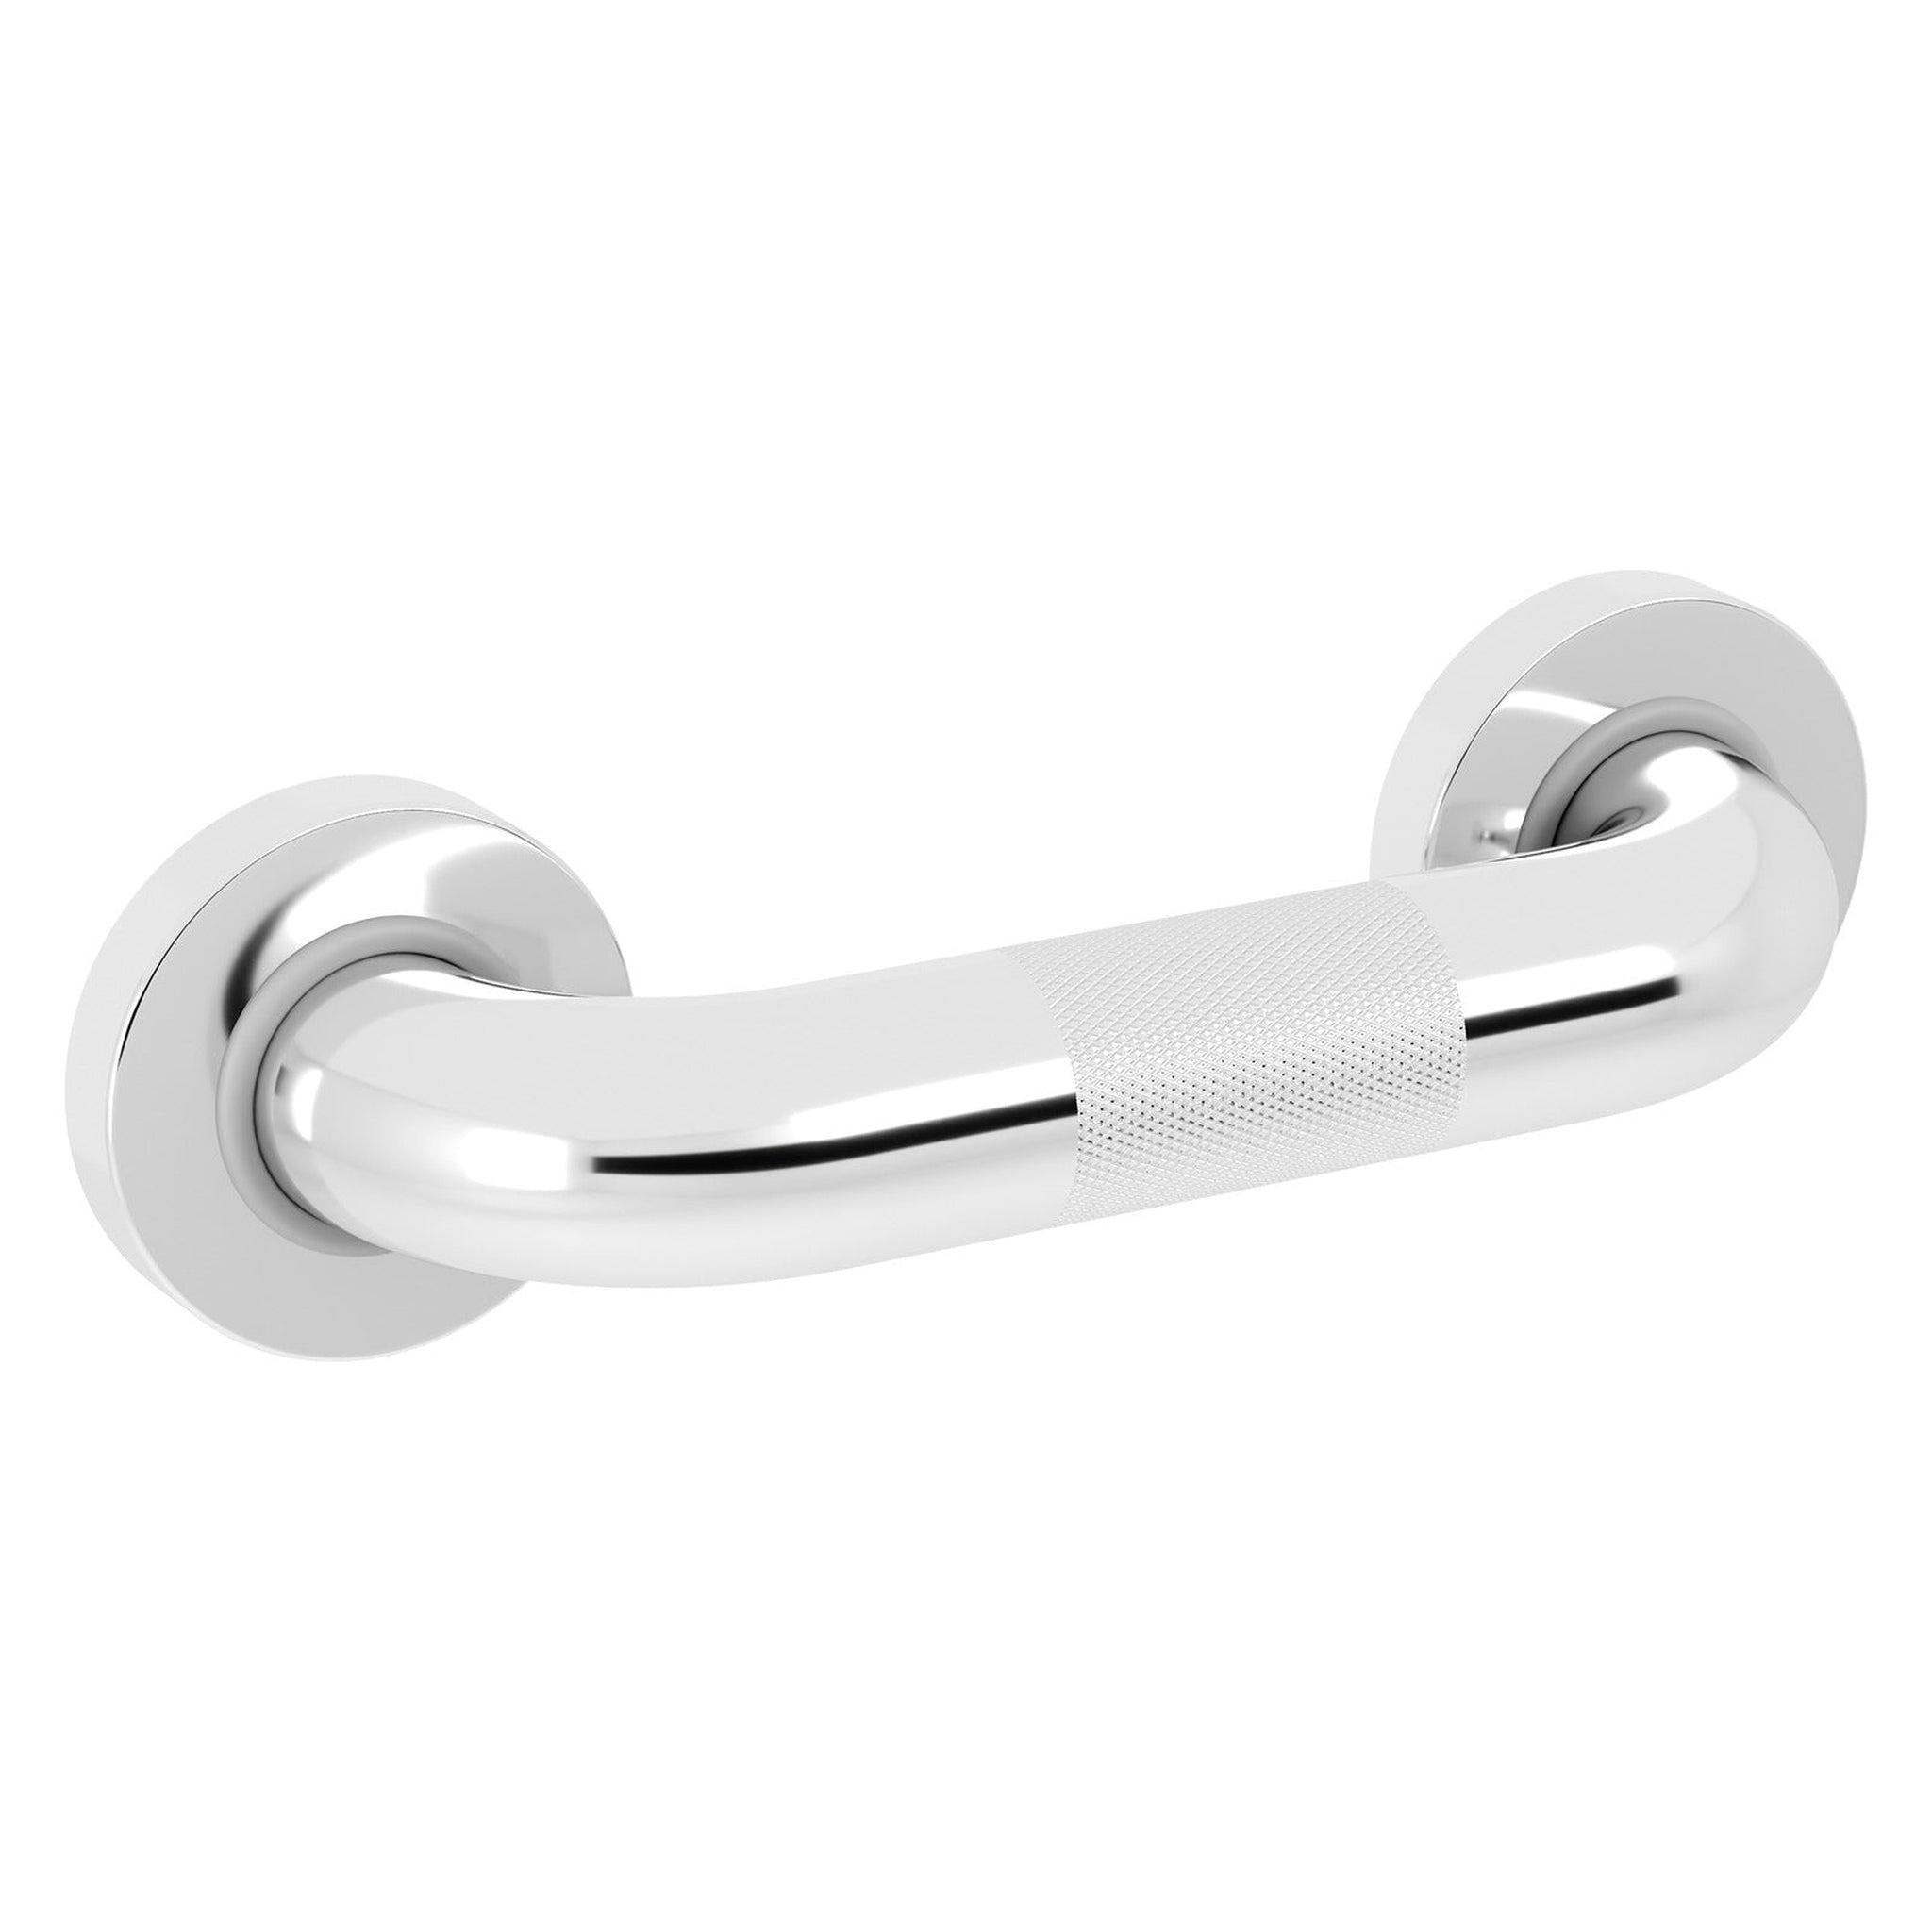 Evekare, Evekare 8" x 1.5" Knurled Stainless Steel Concealed Mount Grab Bar